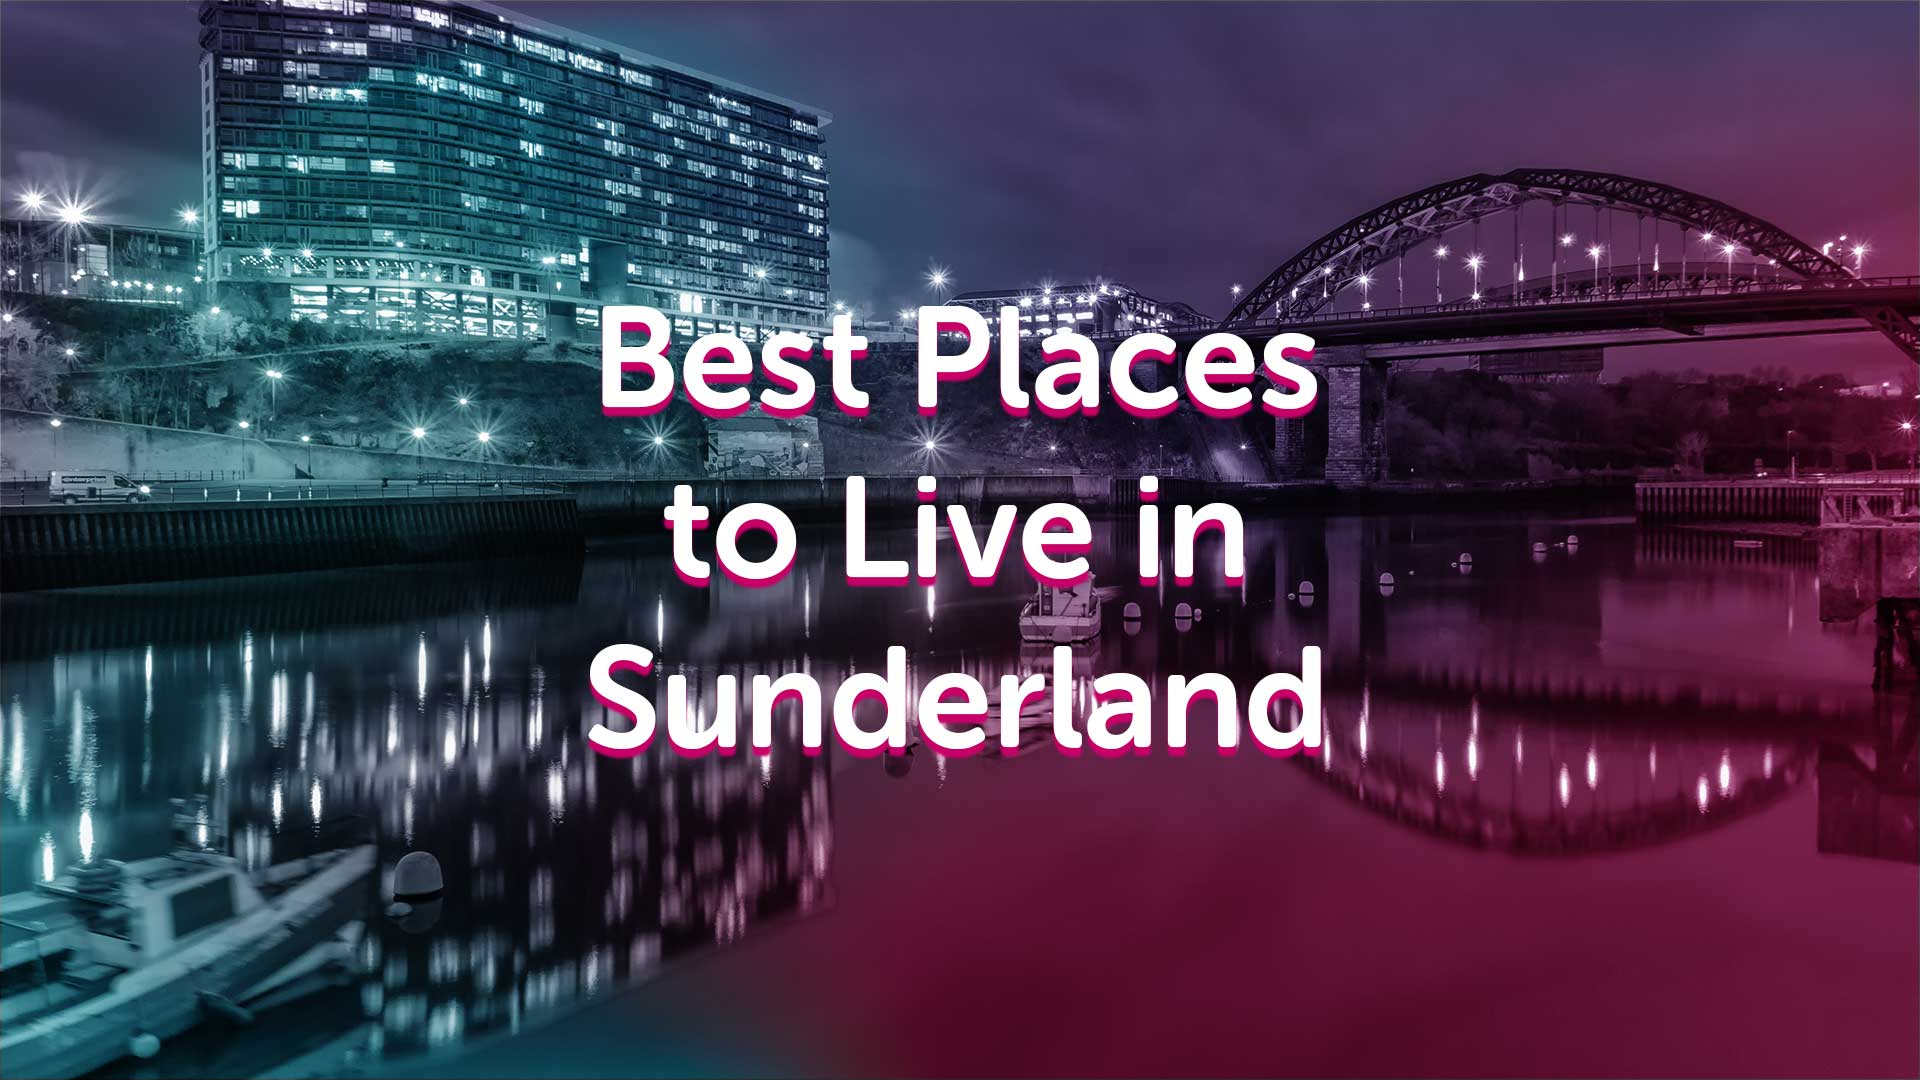 7 Best Places to Live in Sunderland